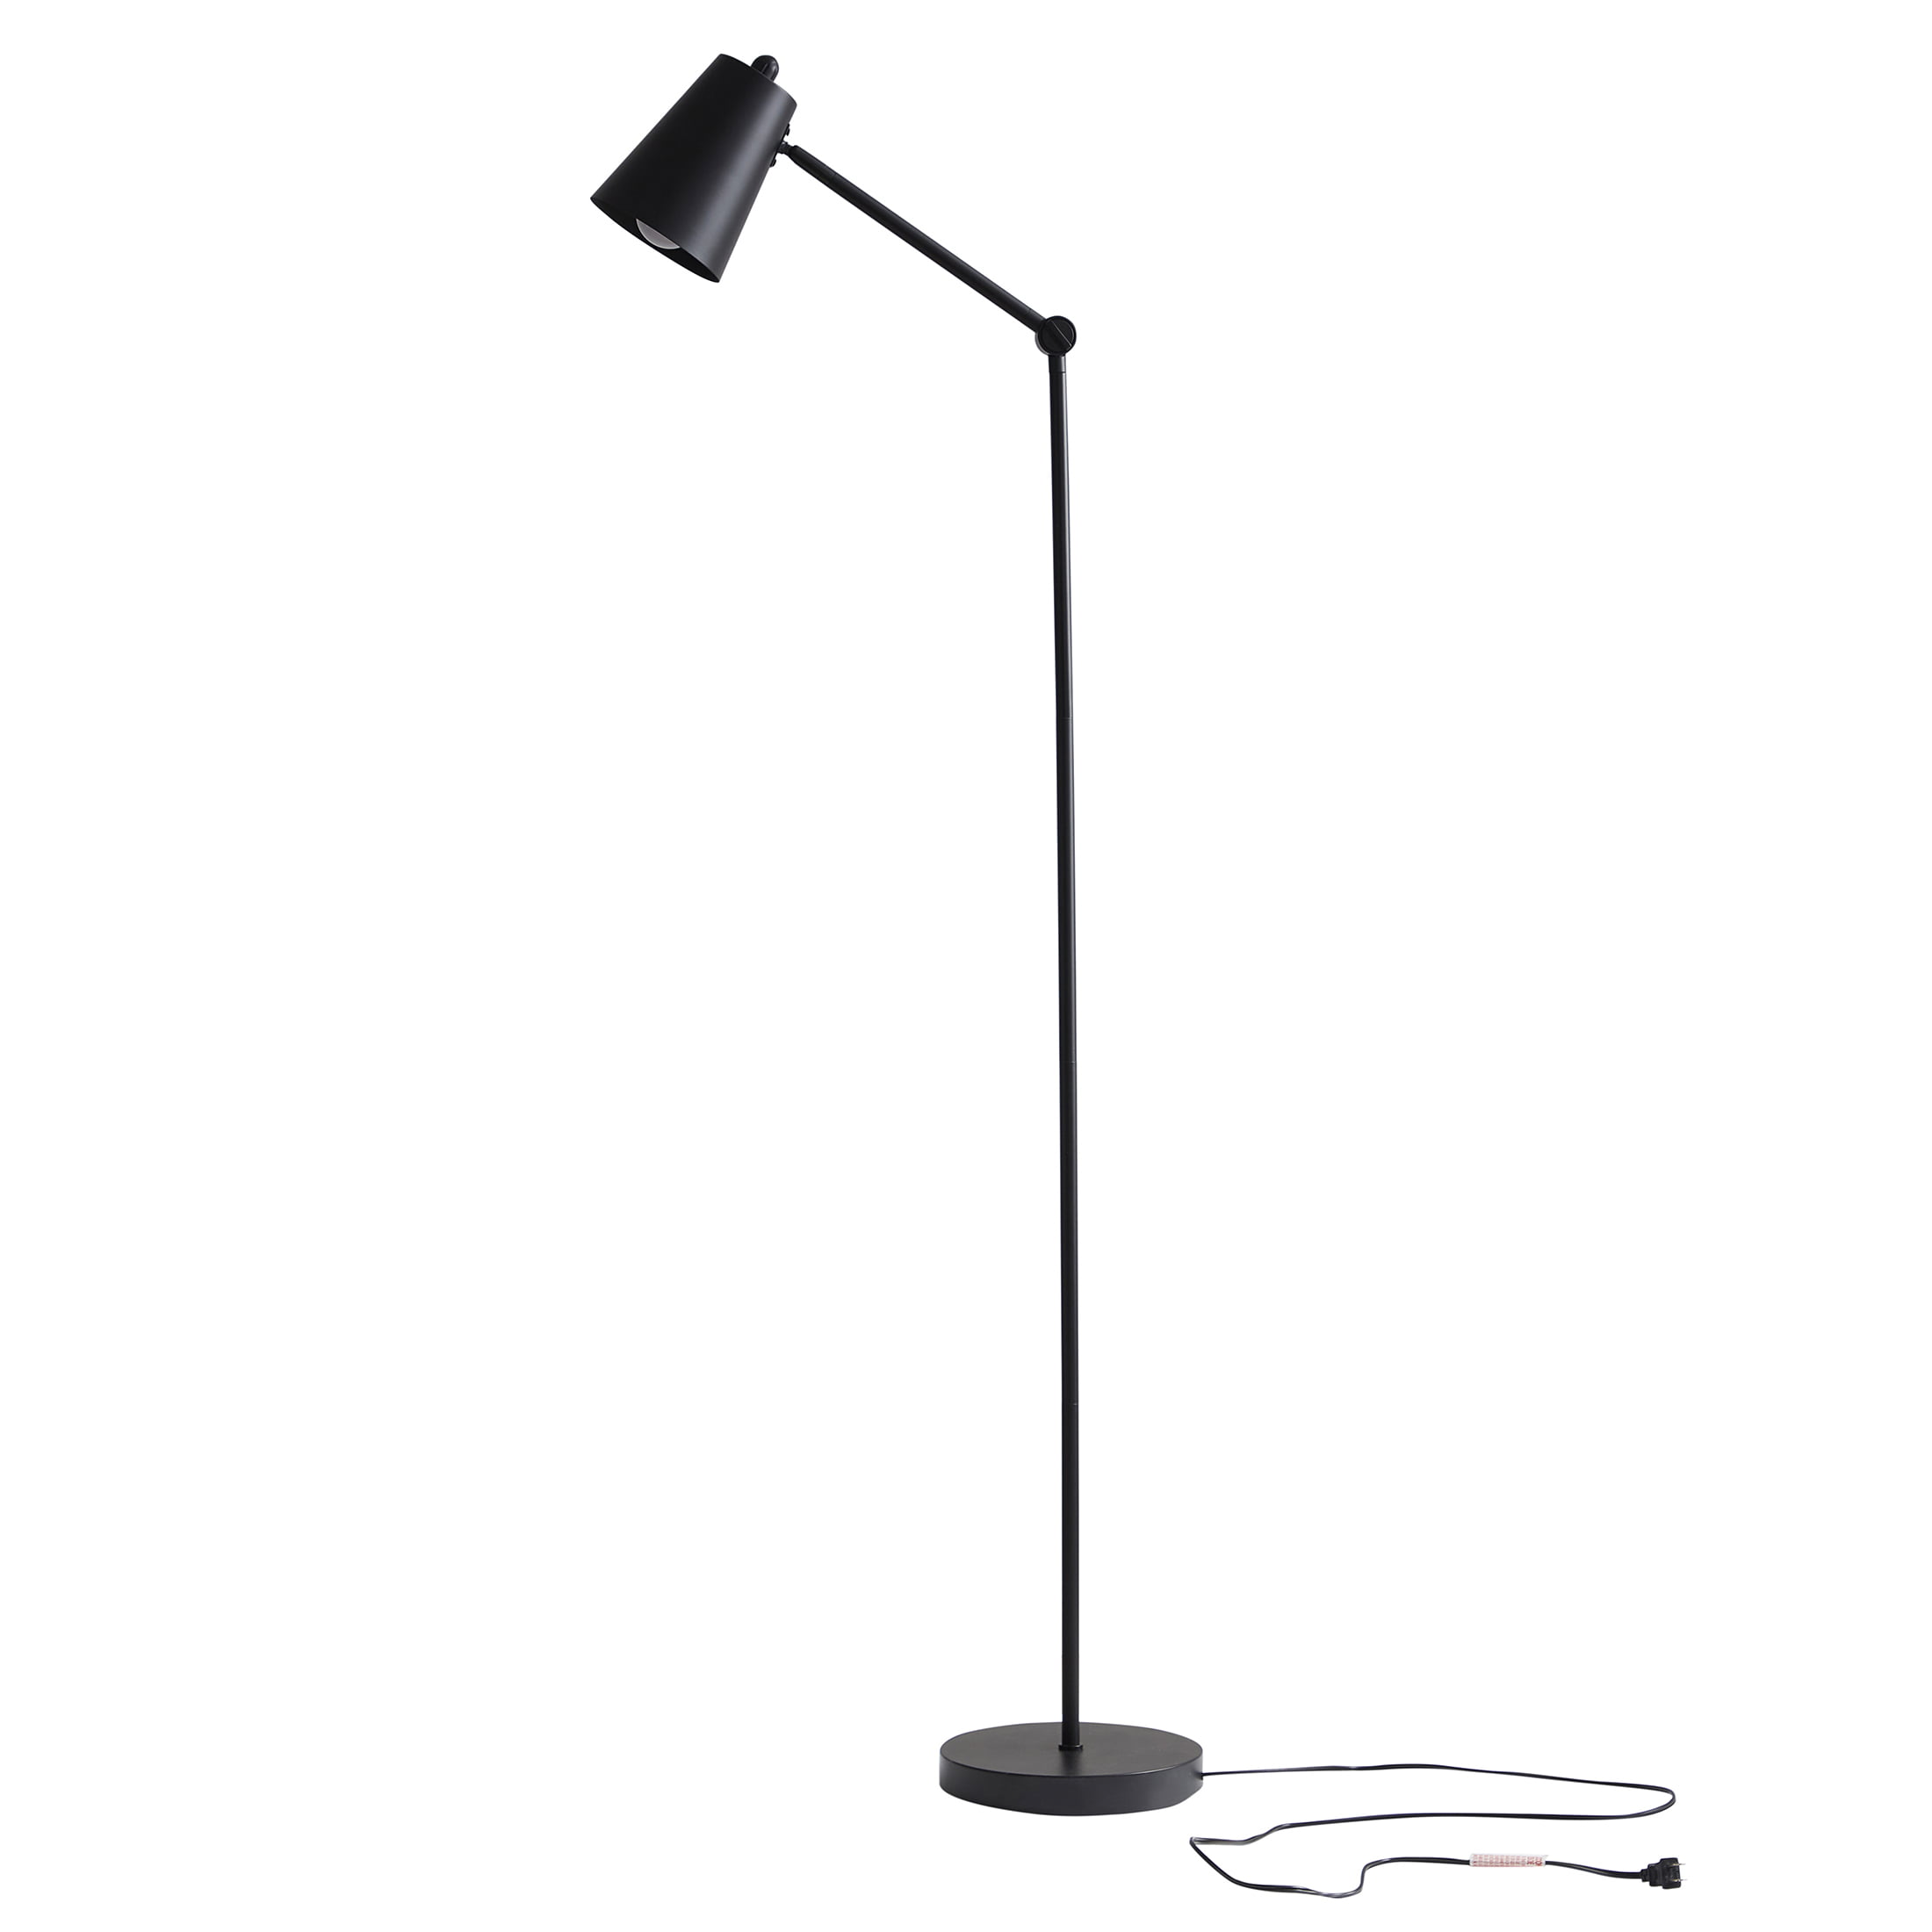 Mainstays 64 inch Black Architect Floor Lamp with LED Bulb， Matte Metal Finish